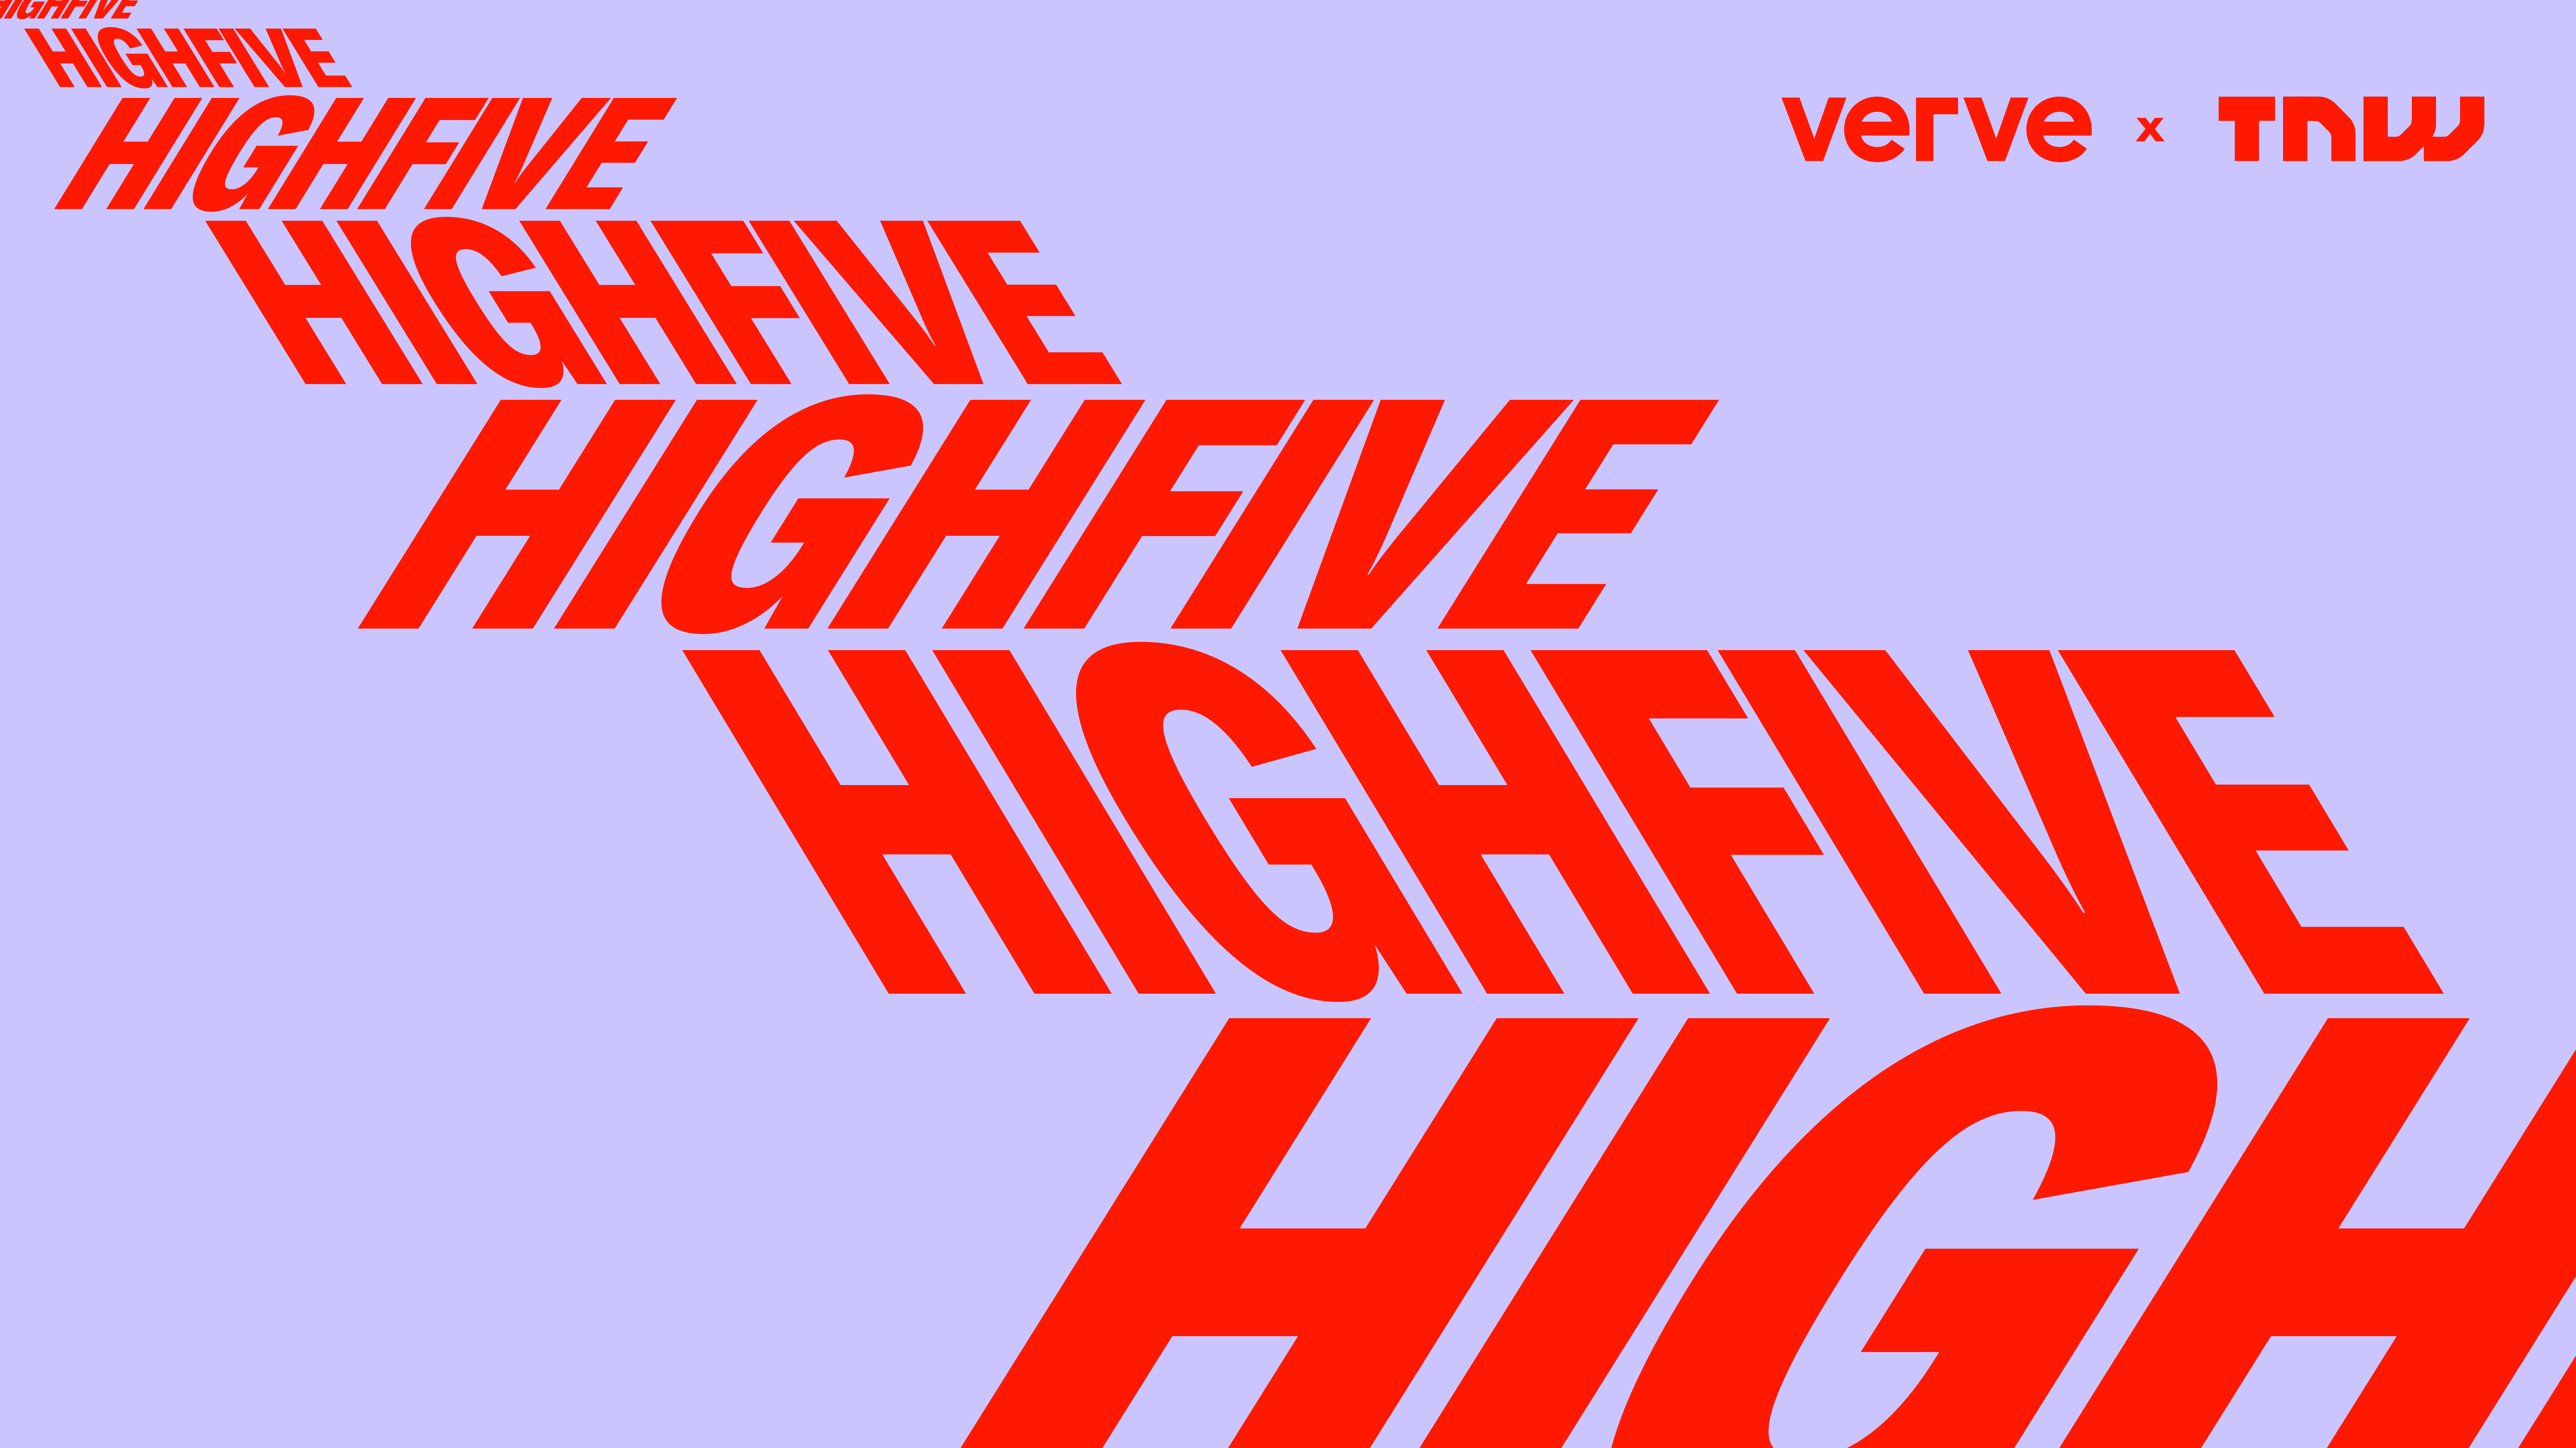 Design Conference: High Five